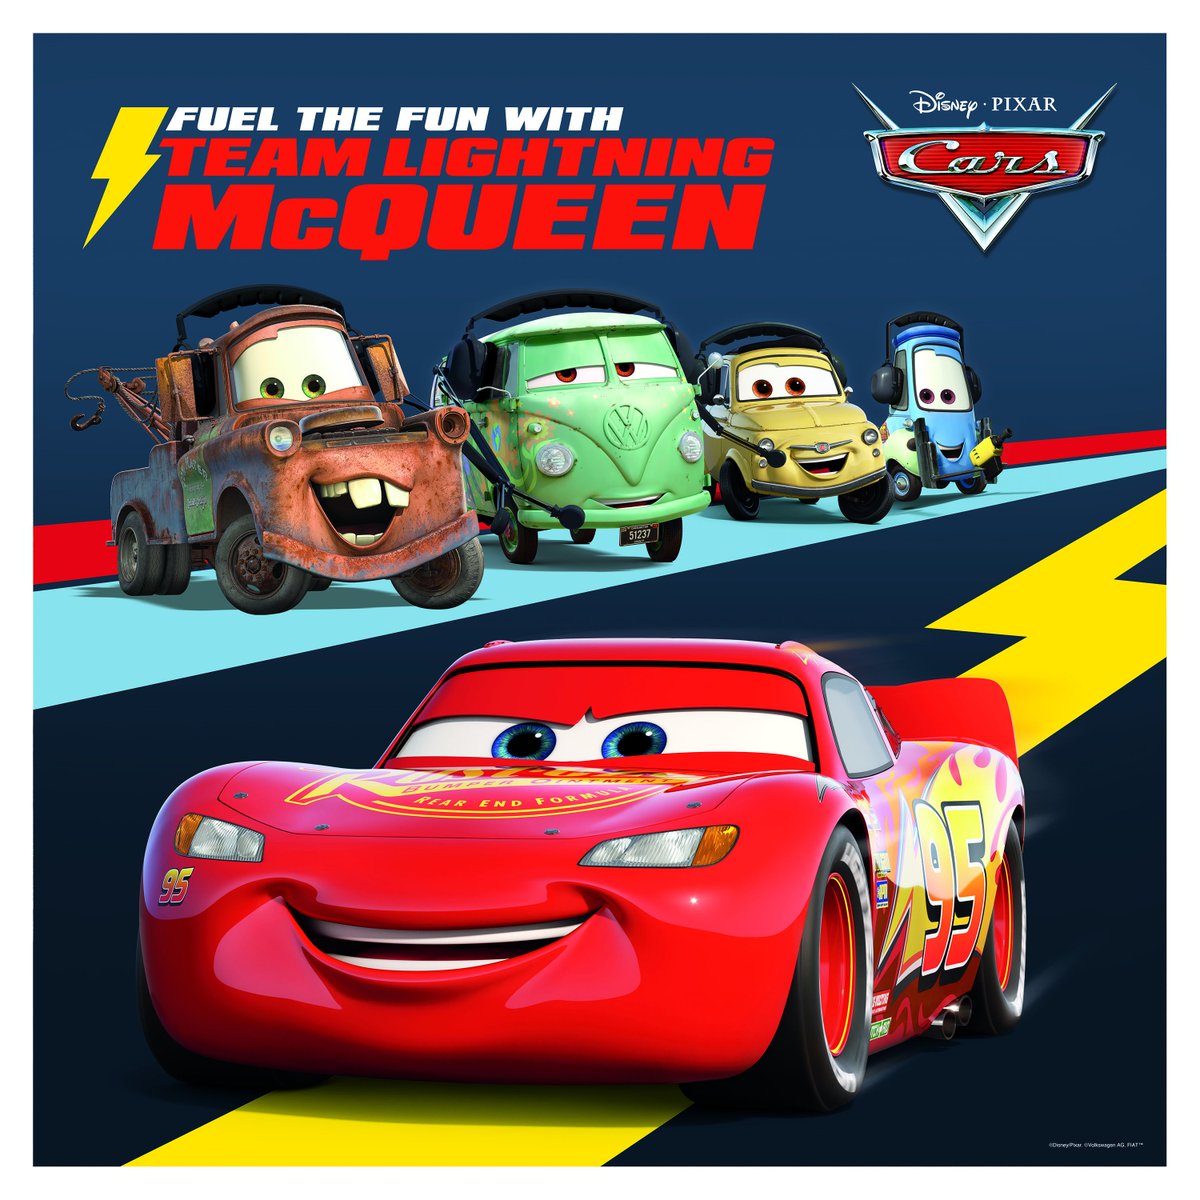 Disney Pixar S Cars Rev Up Your Engines It S Cars Week Join Team Lightning Mcqueen And Celebrate All Week With New Content On The Pixar Cars Youtube Channel Carsweek T Co 2jucm5b4c7